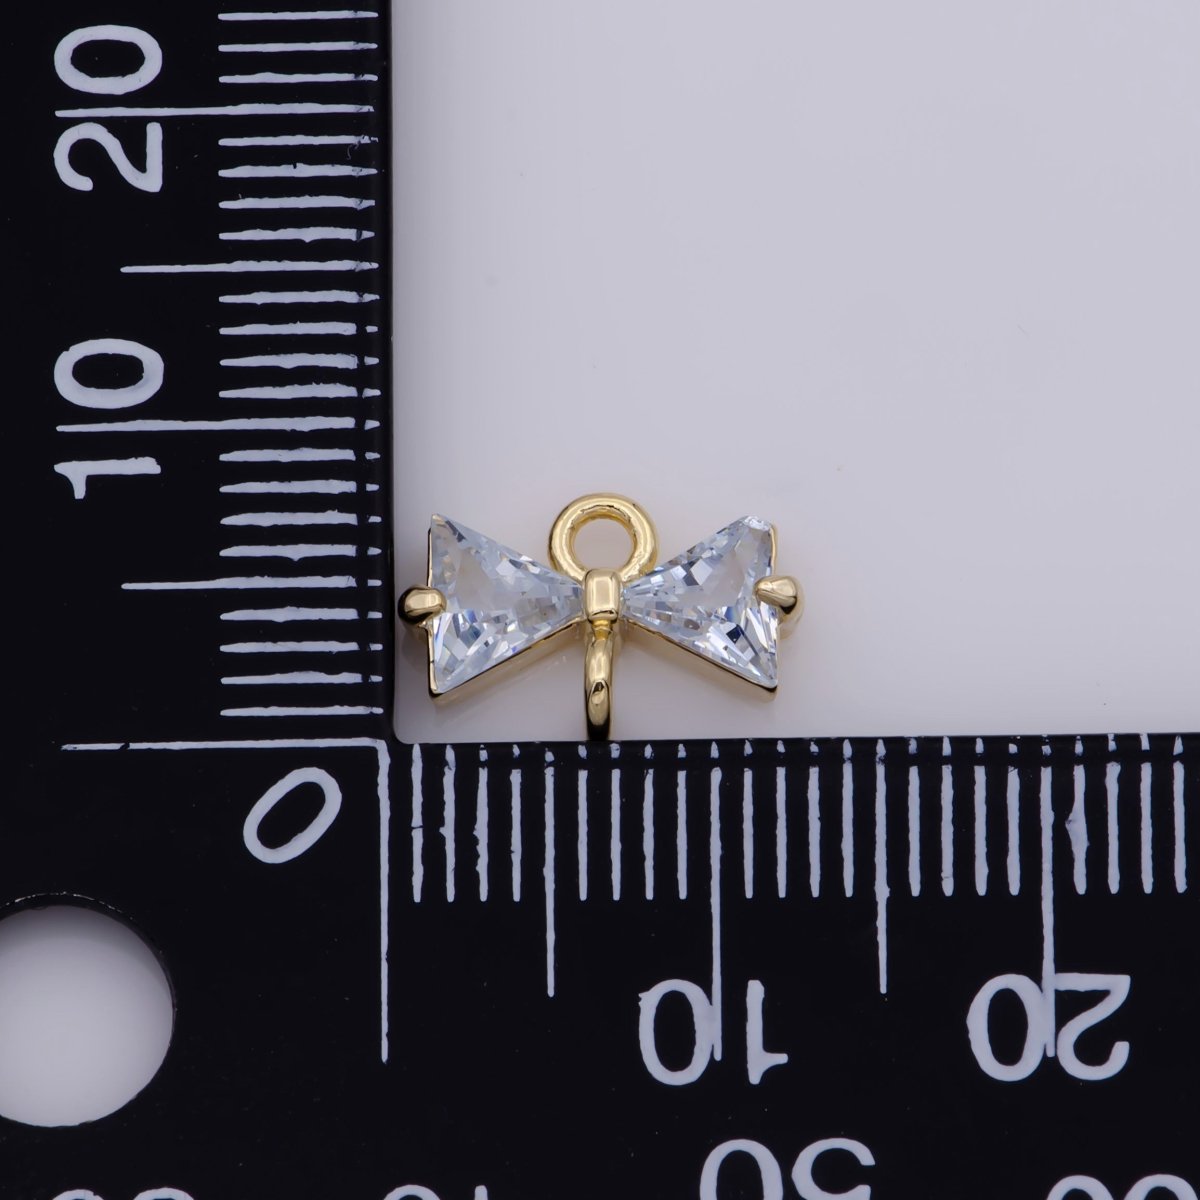 1x Cubic Bow Zirconia 14k Gold Filled Charm Connector, Bow Pendant, Cz Bow Charms with Open Link for Necklace Earring Component - DLUXCA